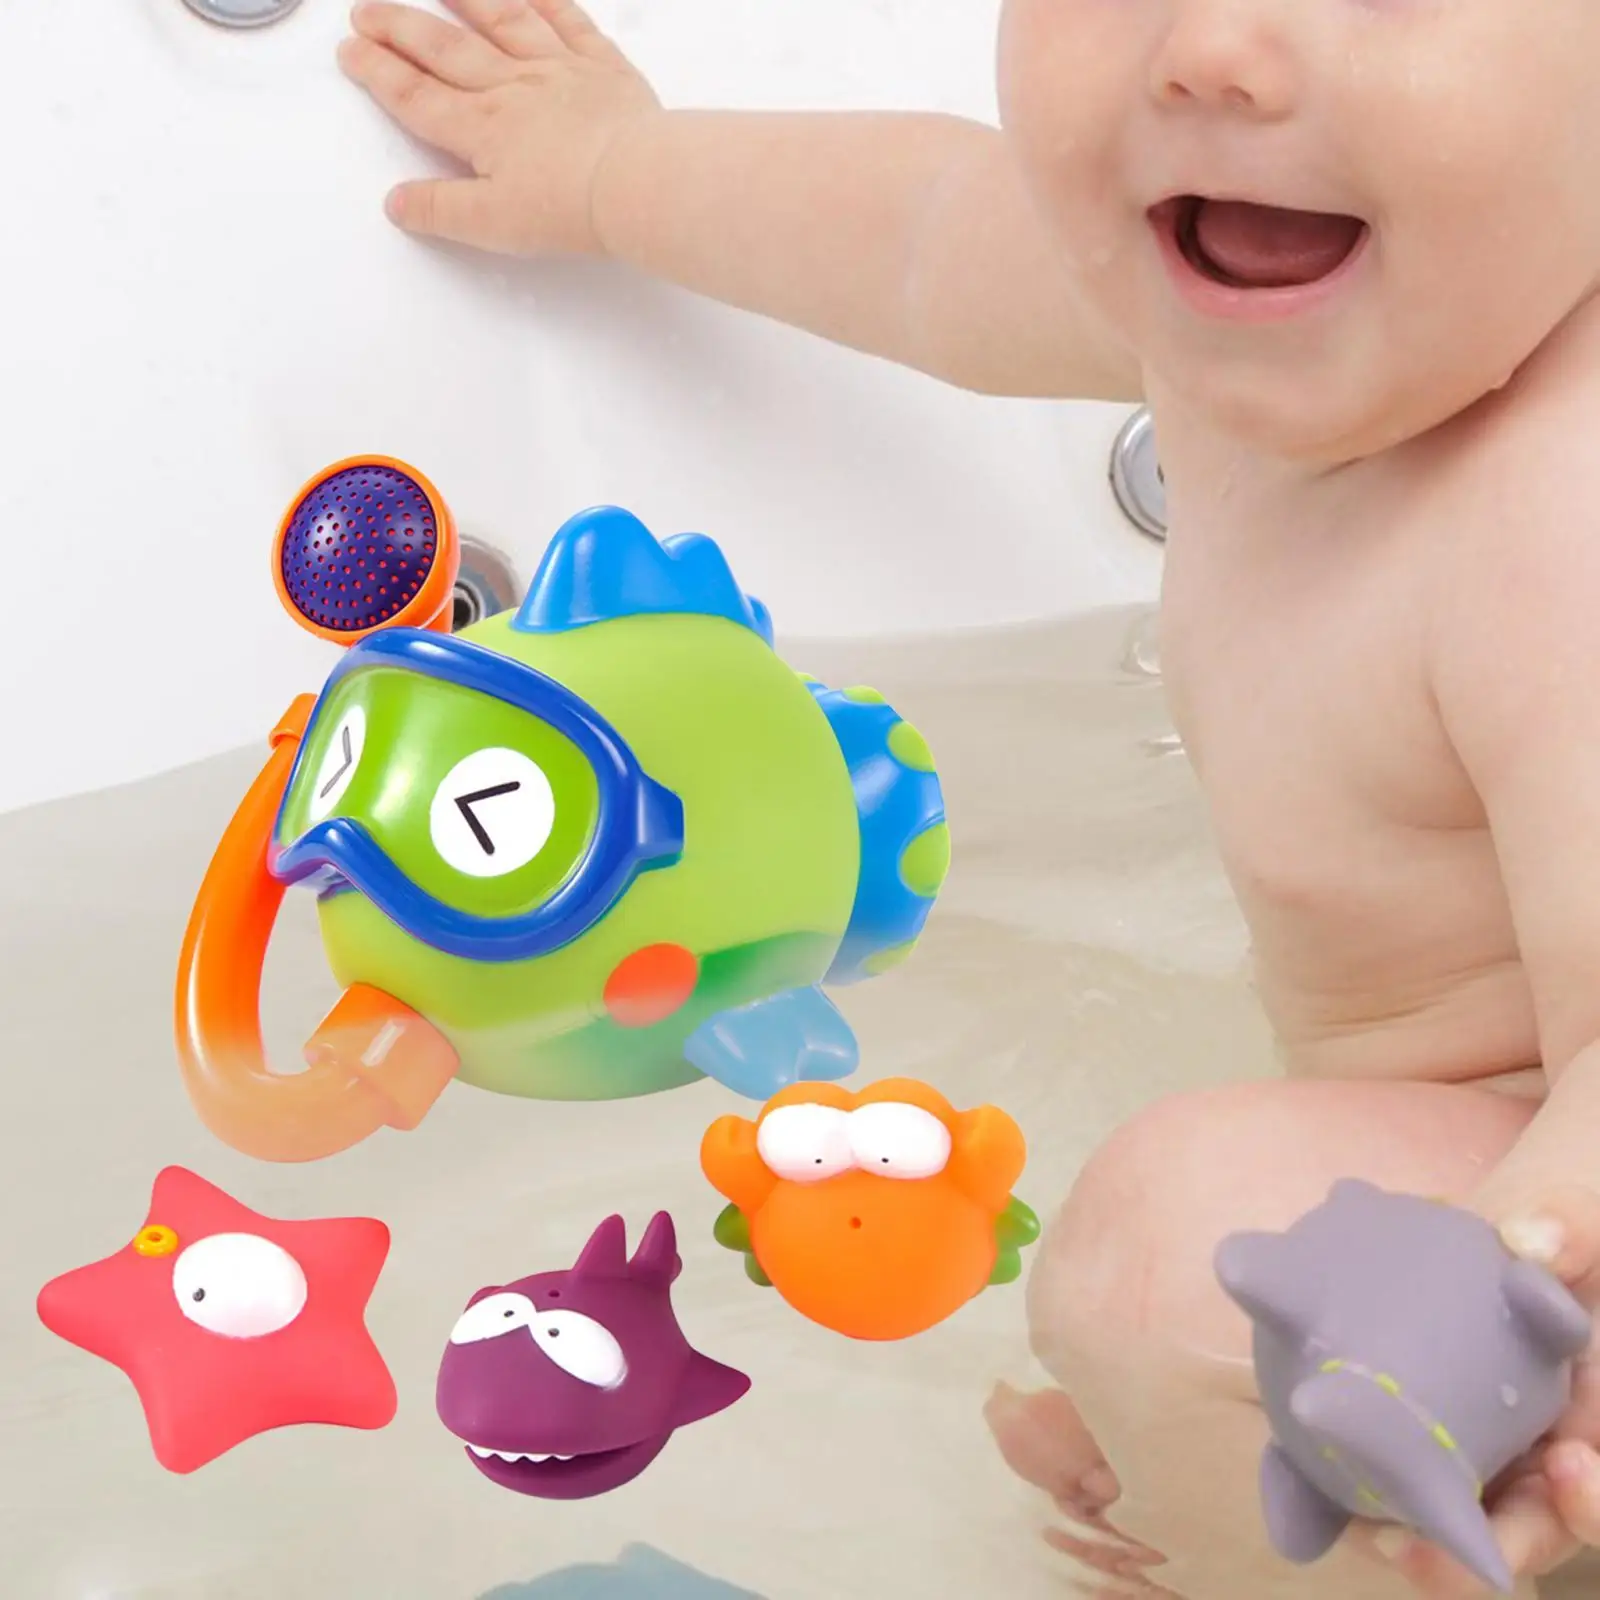 4Pcs Toddlers Bath Shower Toys Ocean Sea Animal Bathtub Toys Bath Tub Toys for Infants Kids Baby Toddlers Great Gifts